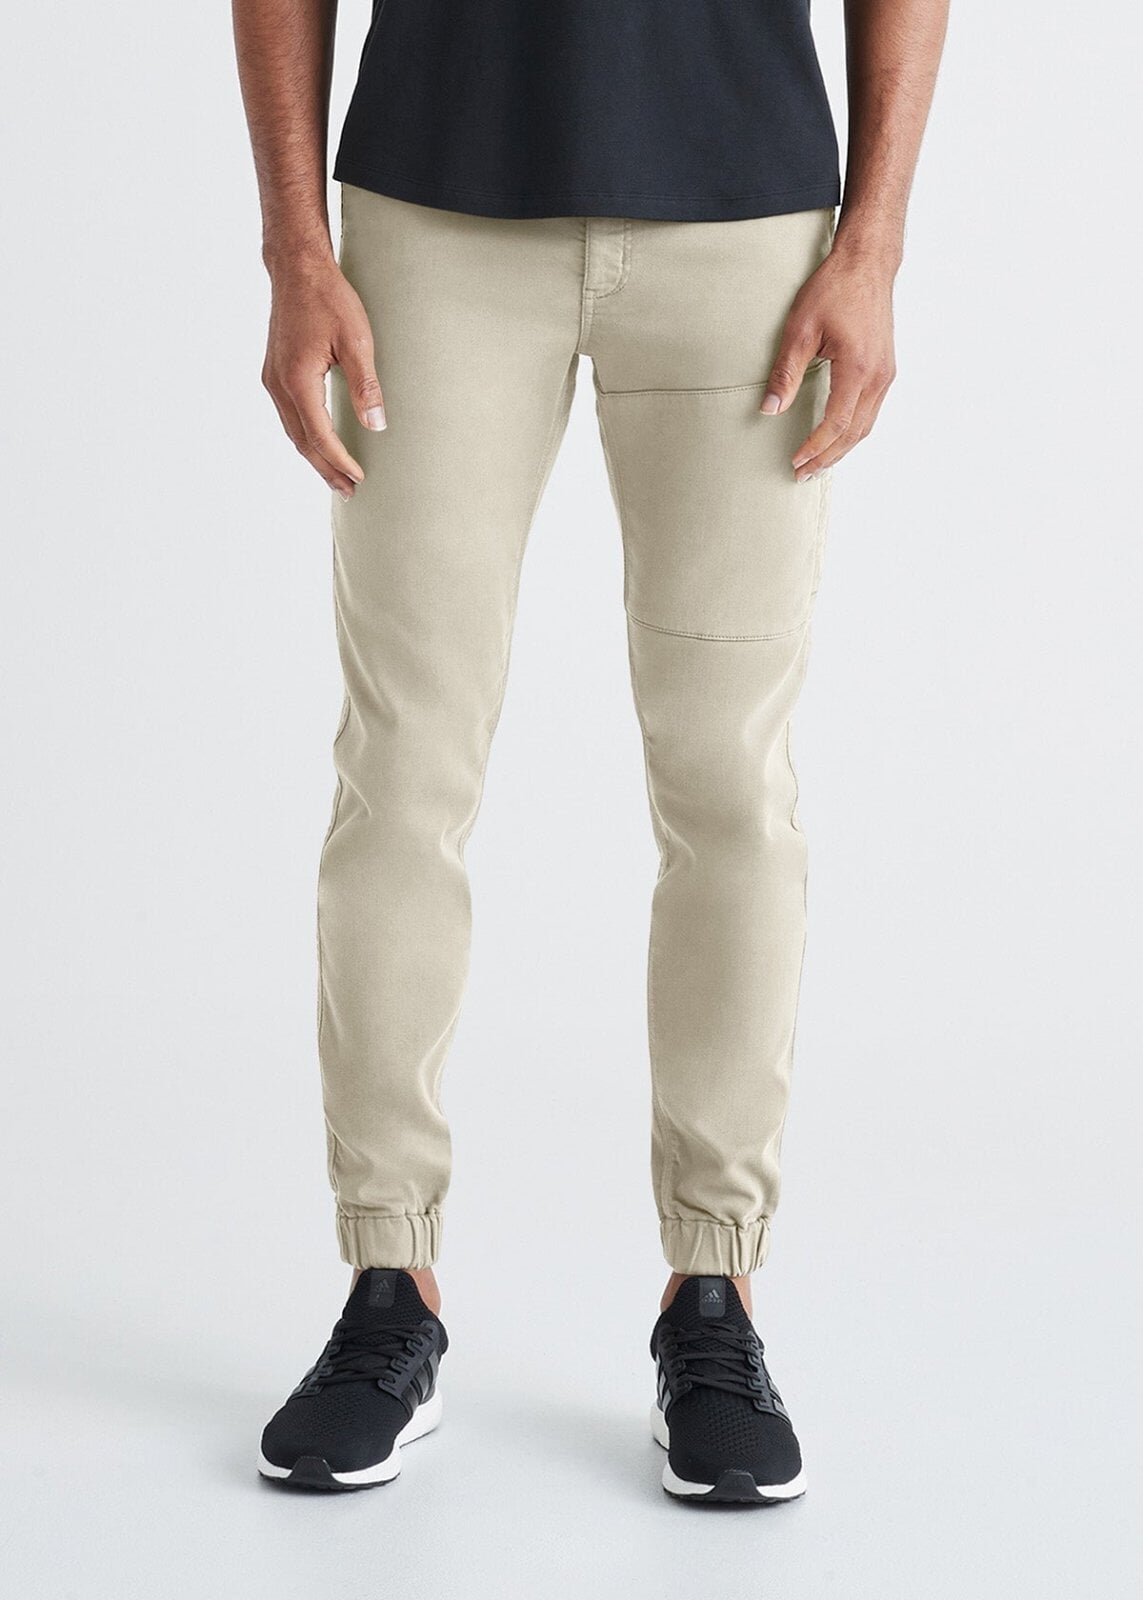  Gillberry Khaki Joggers for Men Big and Tall